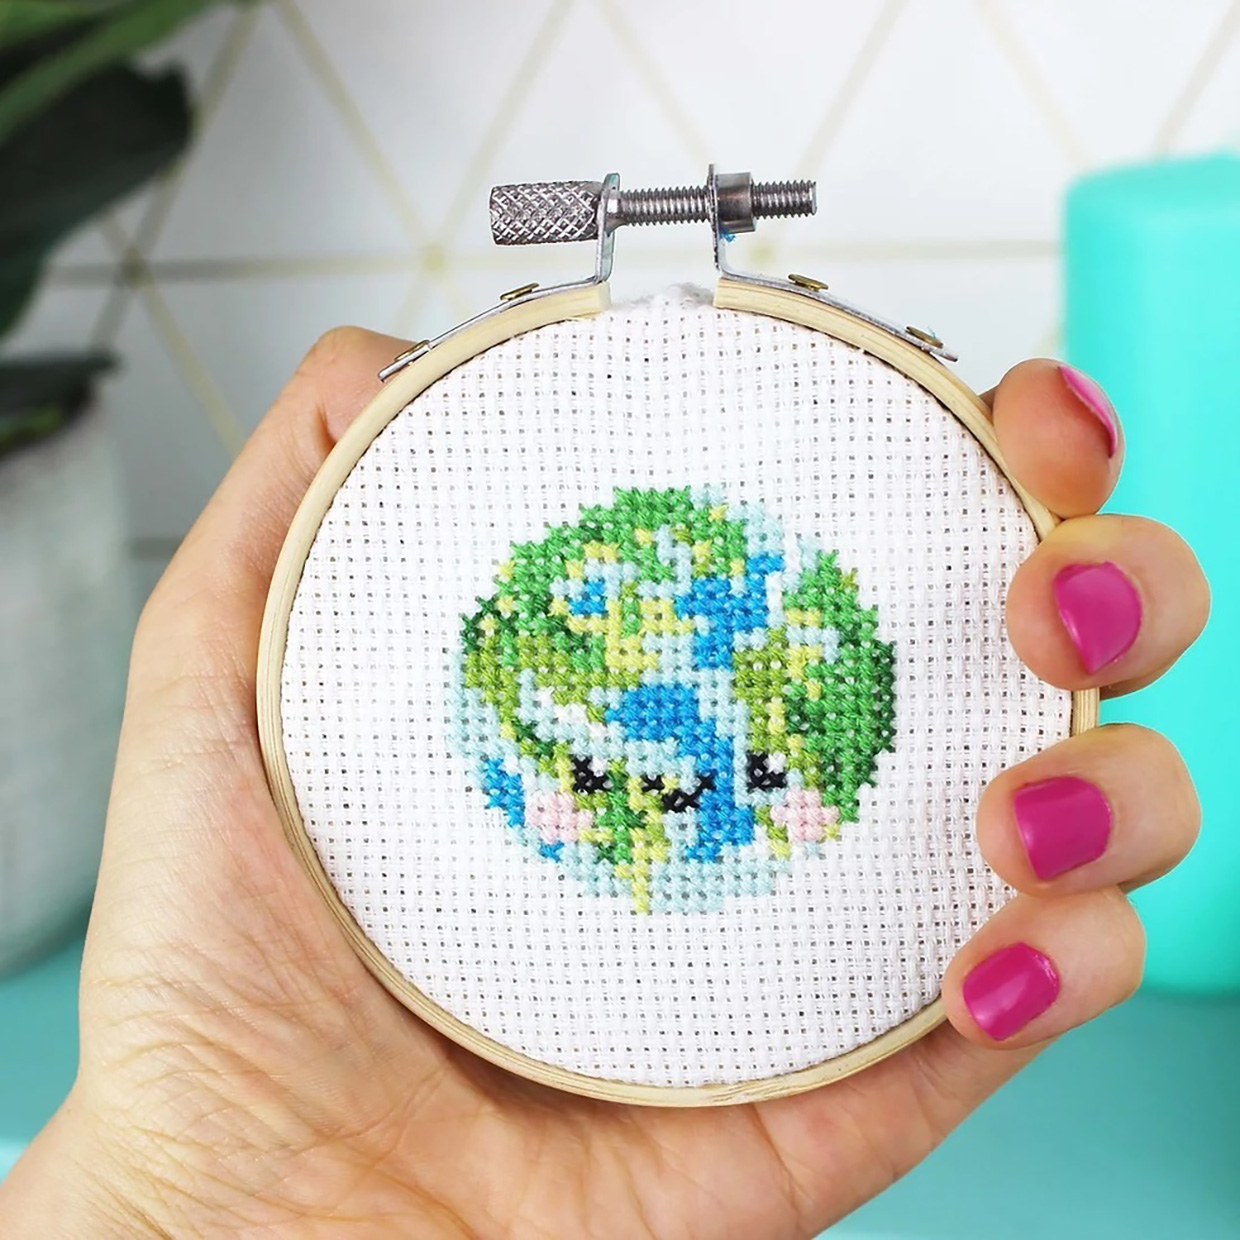 Fantastic cross stitch kits that beginners will love to learn with